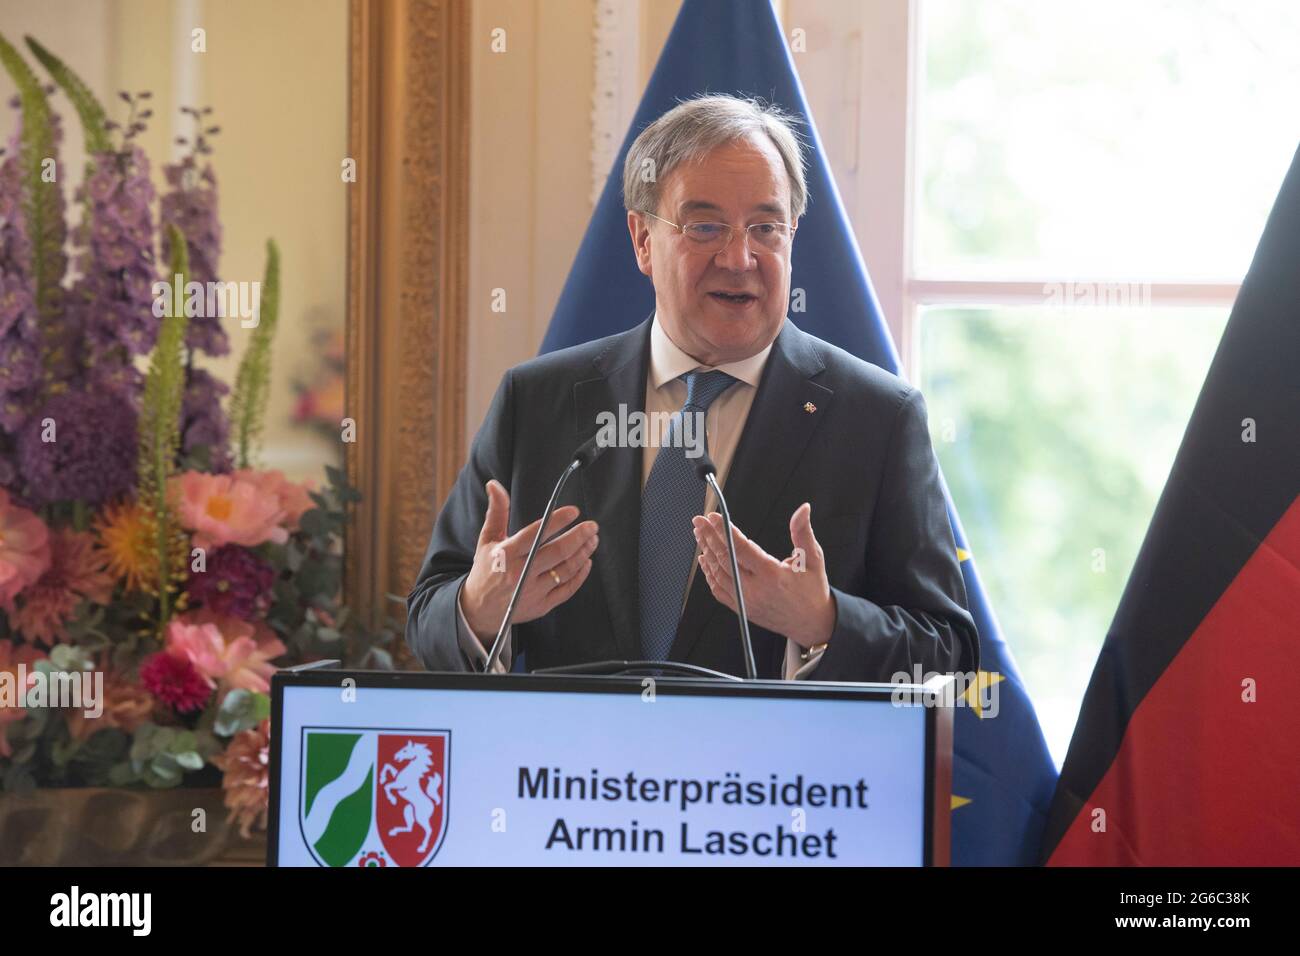 Duesseldorf, Deutschland. 28th June, 2021. Prime Minister Armin LASCHET, in his address, Prime Minister Armin Laschet honored citizens of North Rhine-Westphalia for their exceptional commitment to society with the Order of Merit of the State, award of the Order of Merit of the State of North Rhine-Westphalia in Duesseldorf on June 28, 2021 ÃÂÃ ‚ Credit: dpa/Alamy Live News Stock Photo